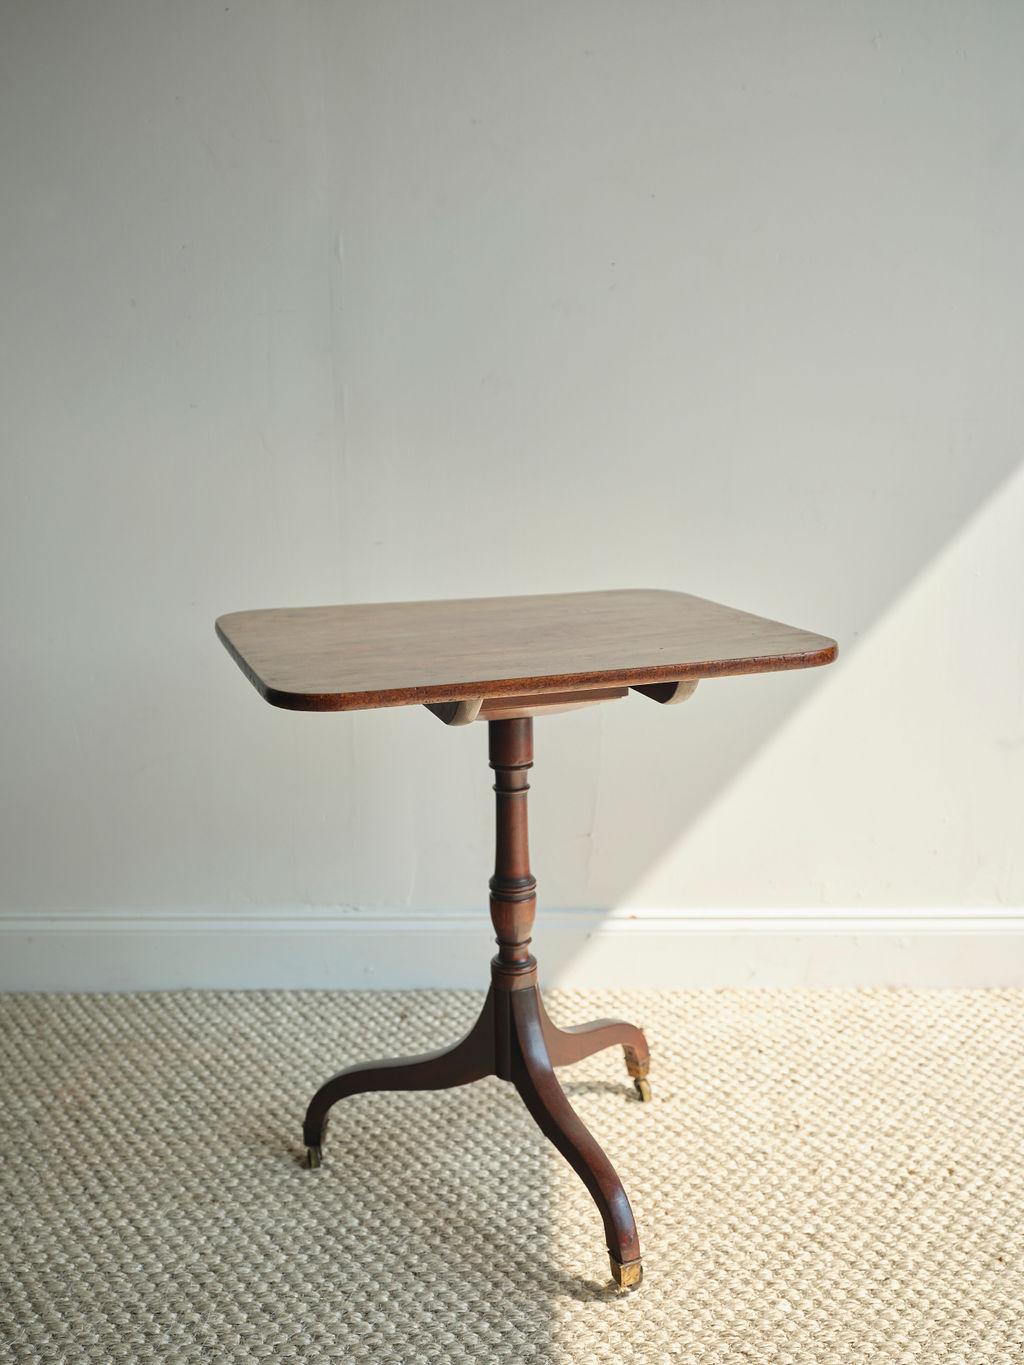 This early 19th century tilt top table is made of mahogany and features a beautiful dark brown stain. Like other furniture crafted during the George III era, this table was built to emphasize the beauty of its wood. Cabriole legs were also very